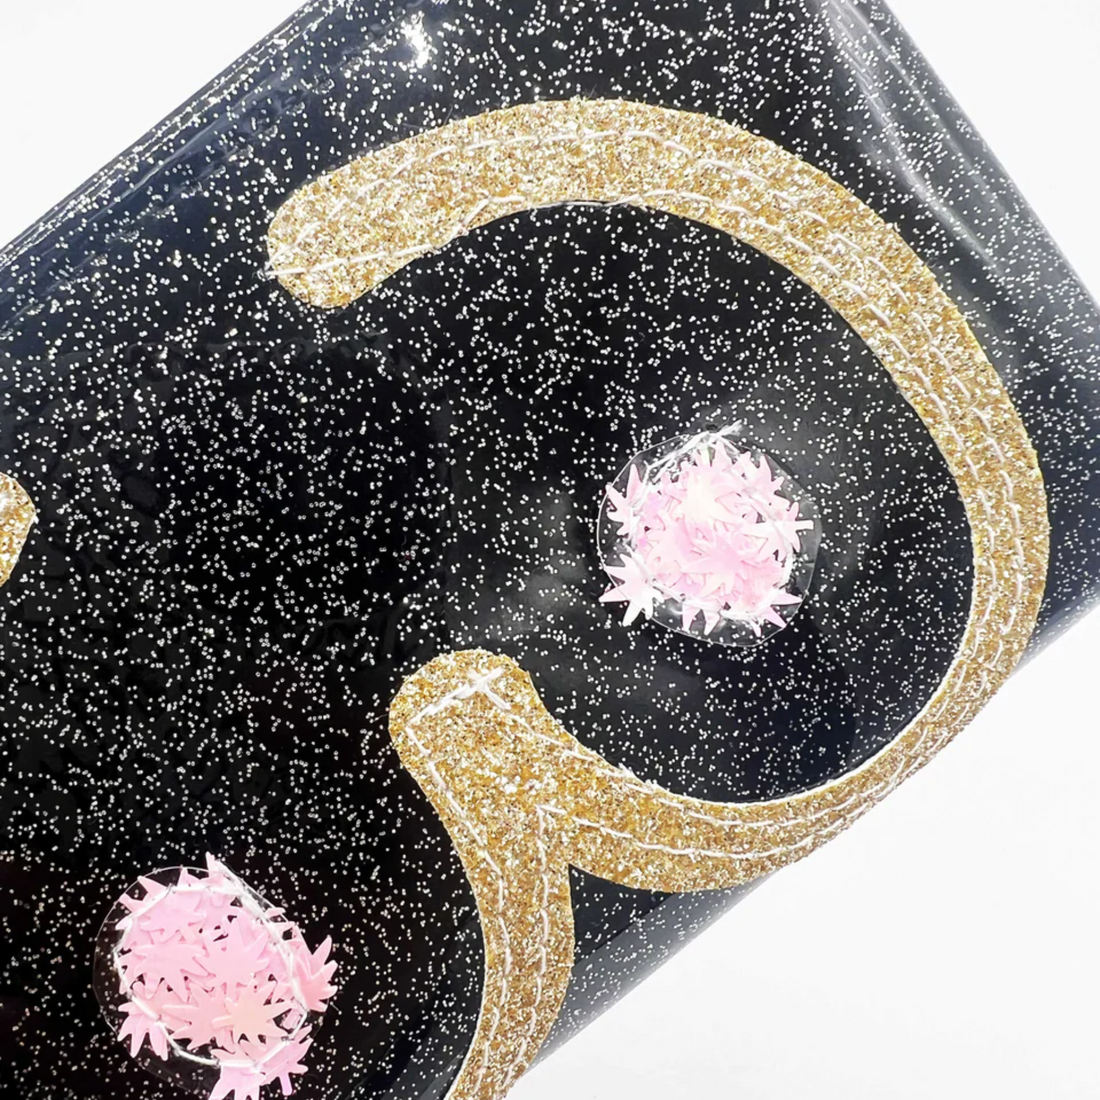 Detailed view of black glitter vinyl clutch with gold outlines and pink cannabis leaf confetti.